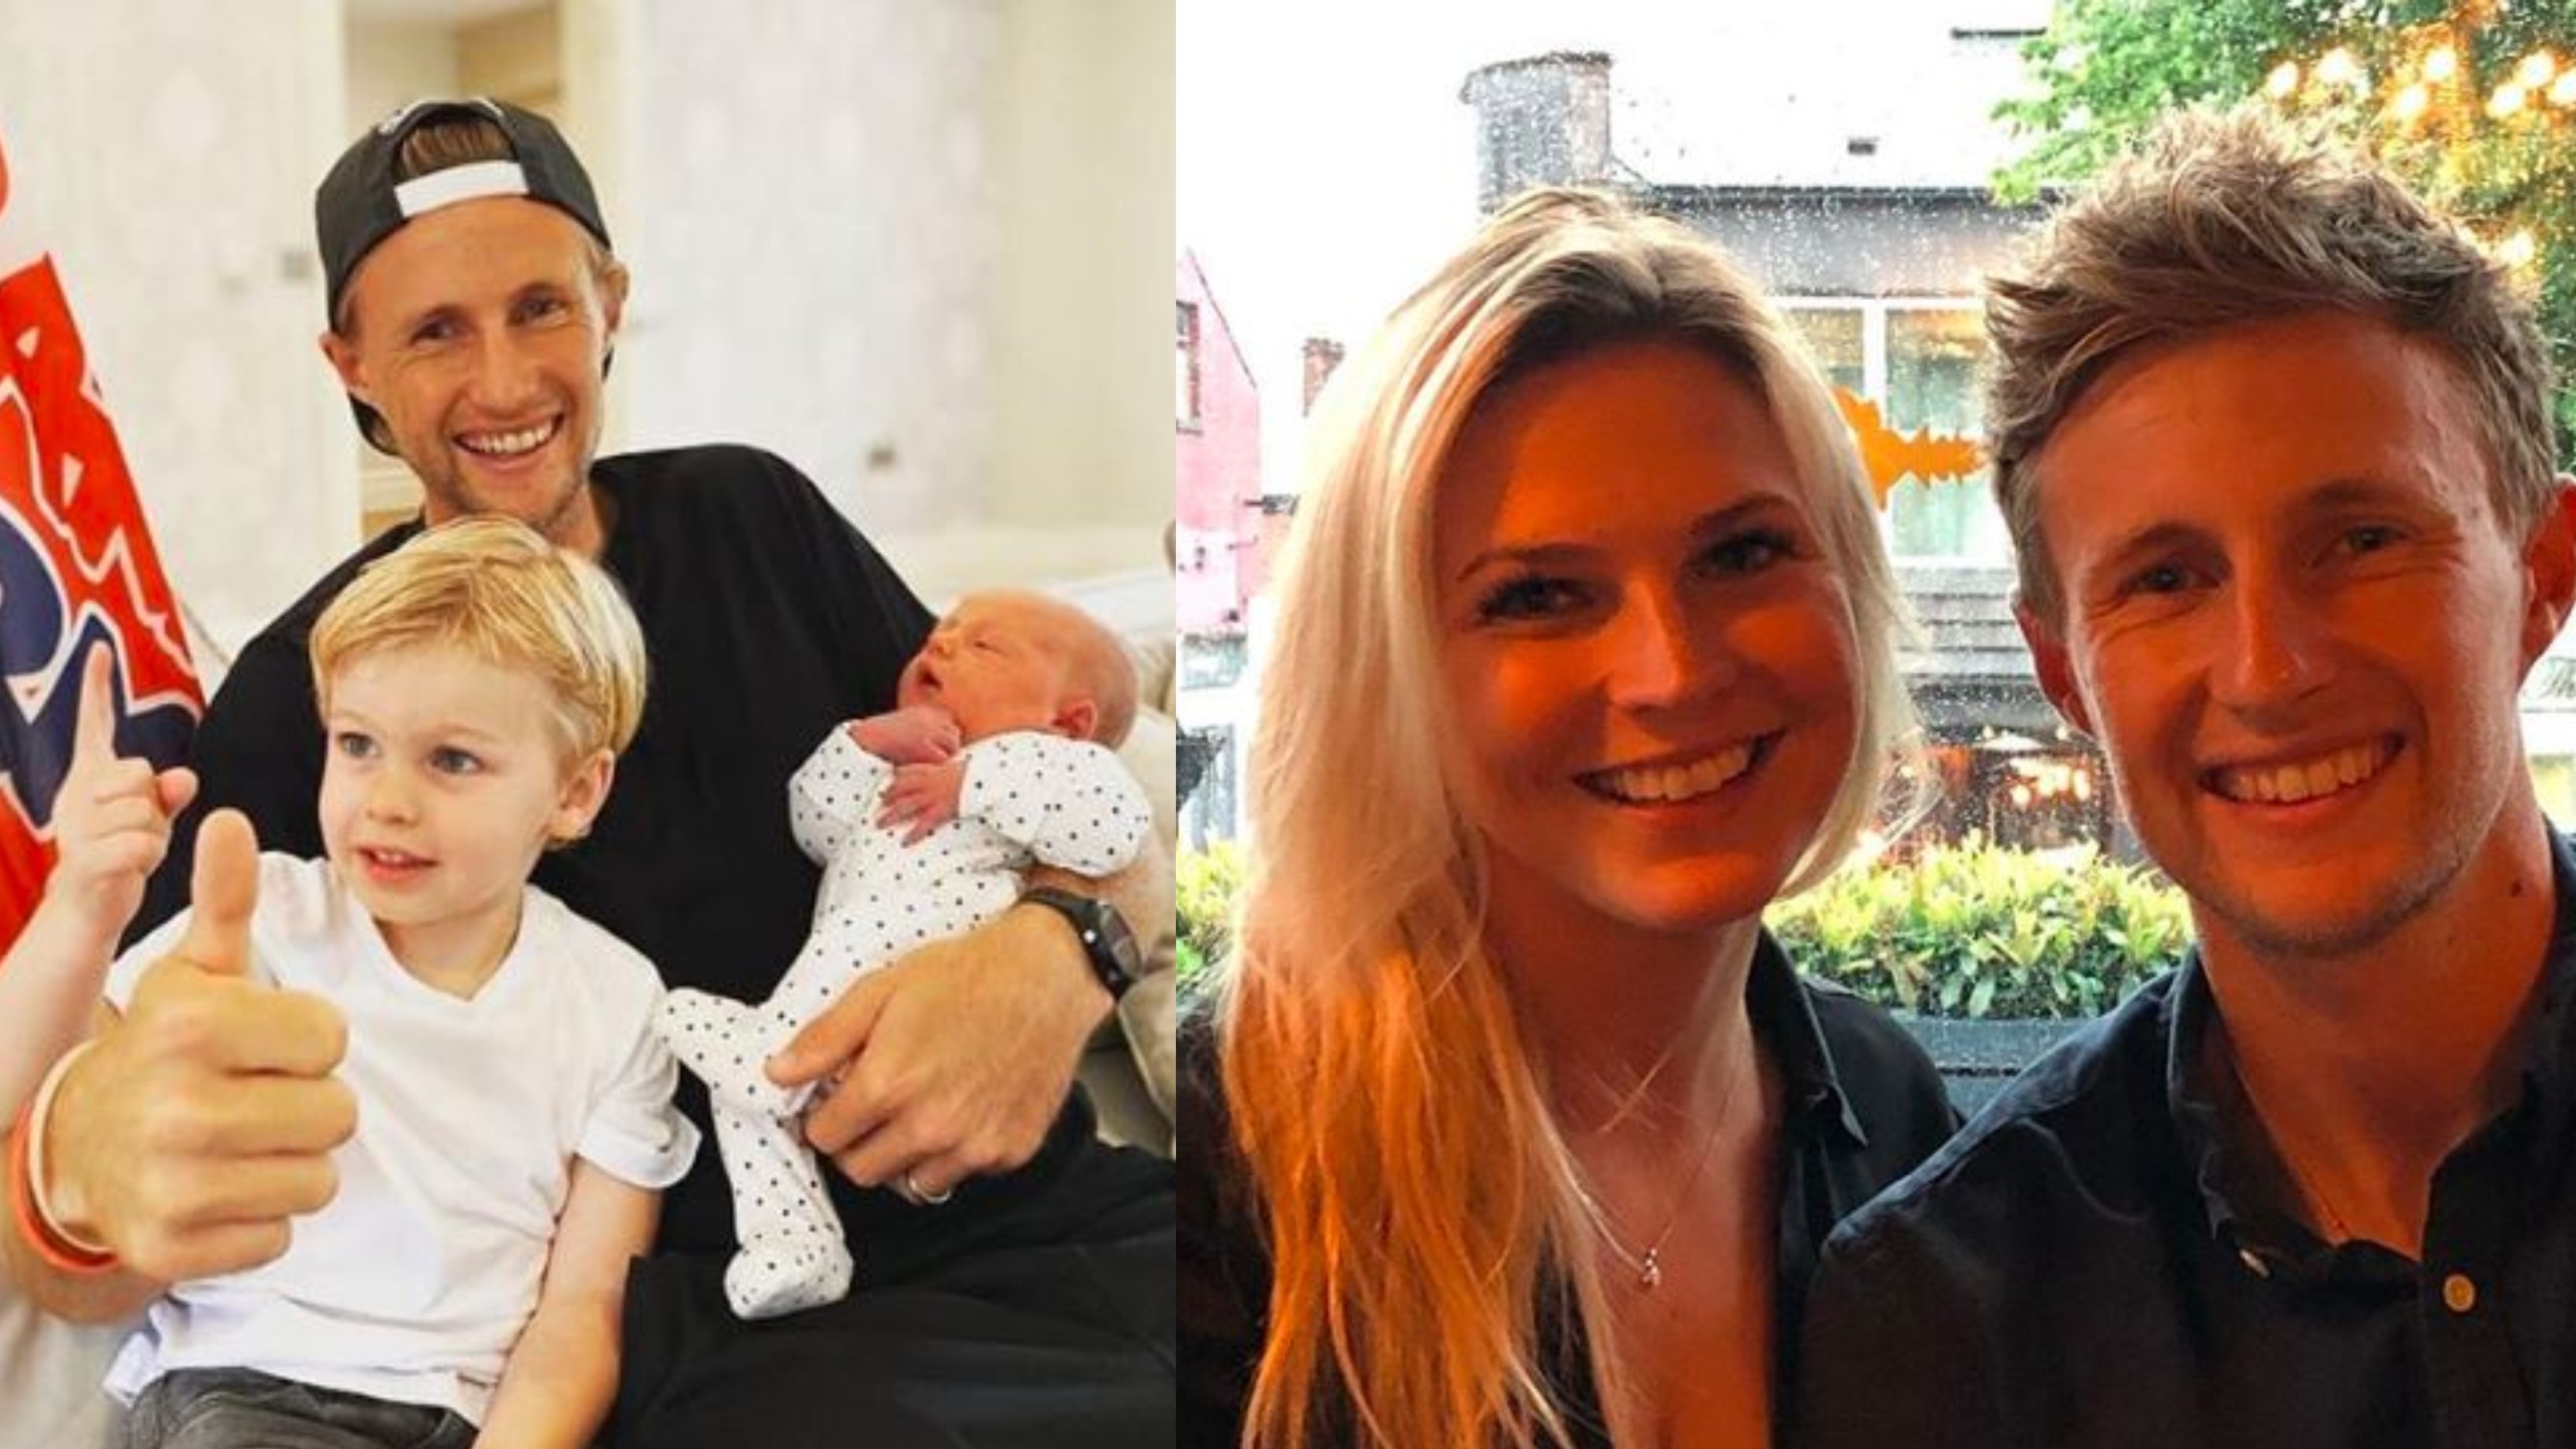 Joe Root welcomes his second child; shares photo with newborn